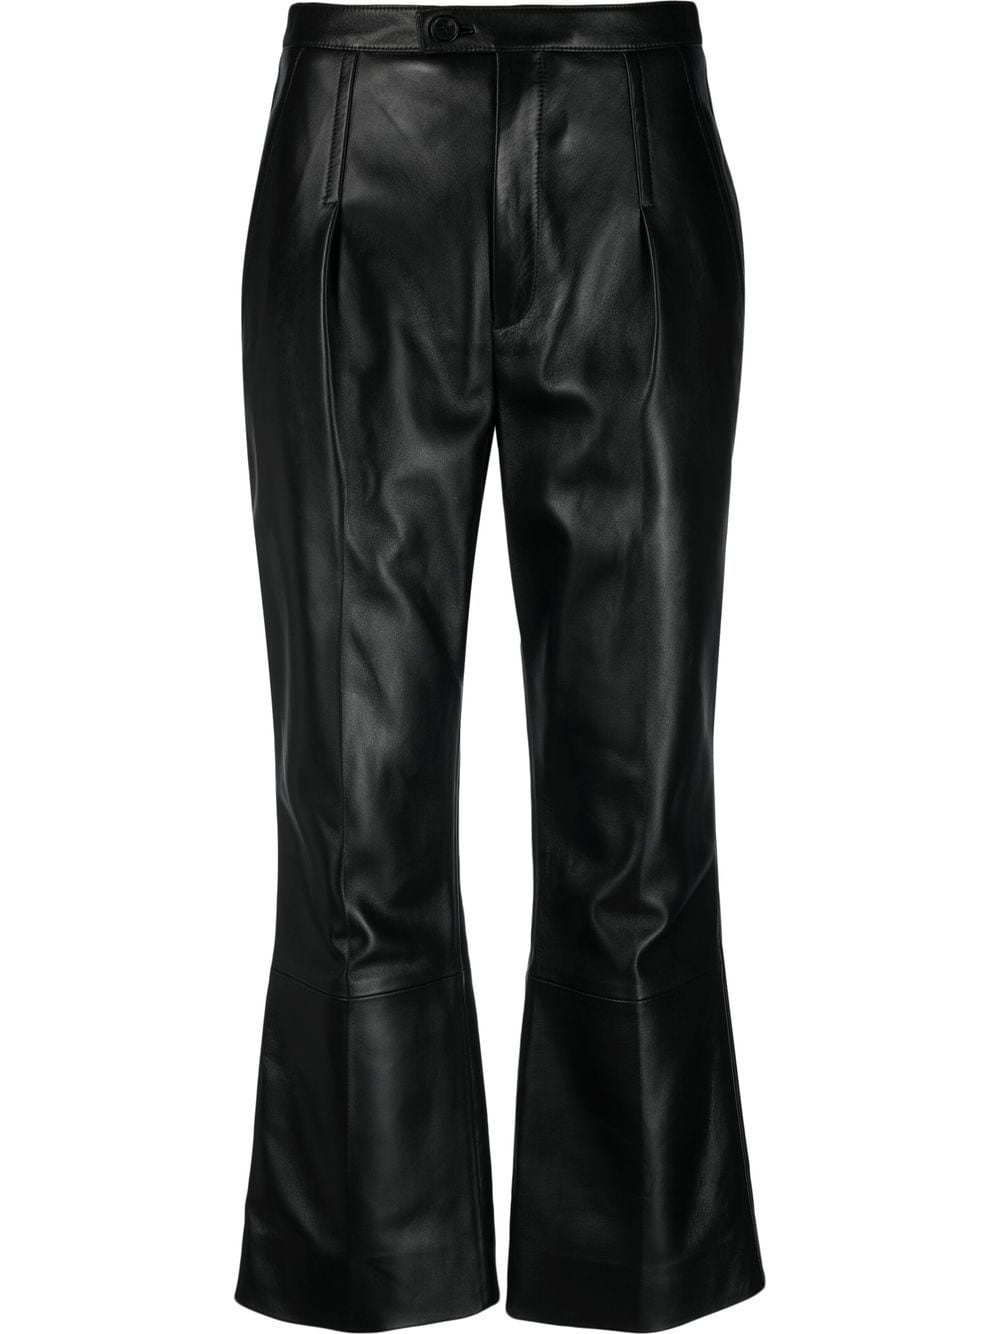 pleat-detail leather trousers